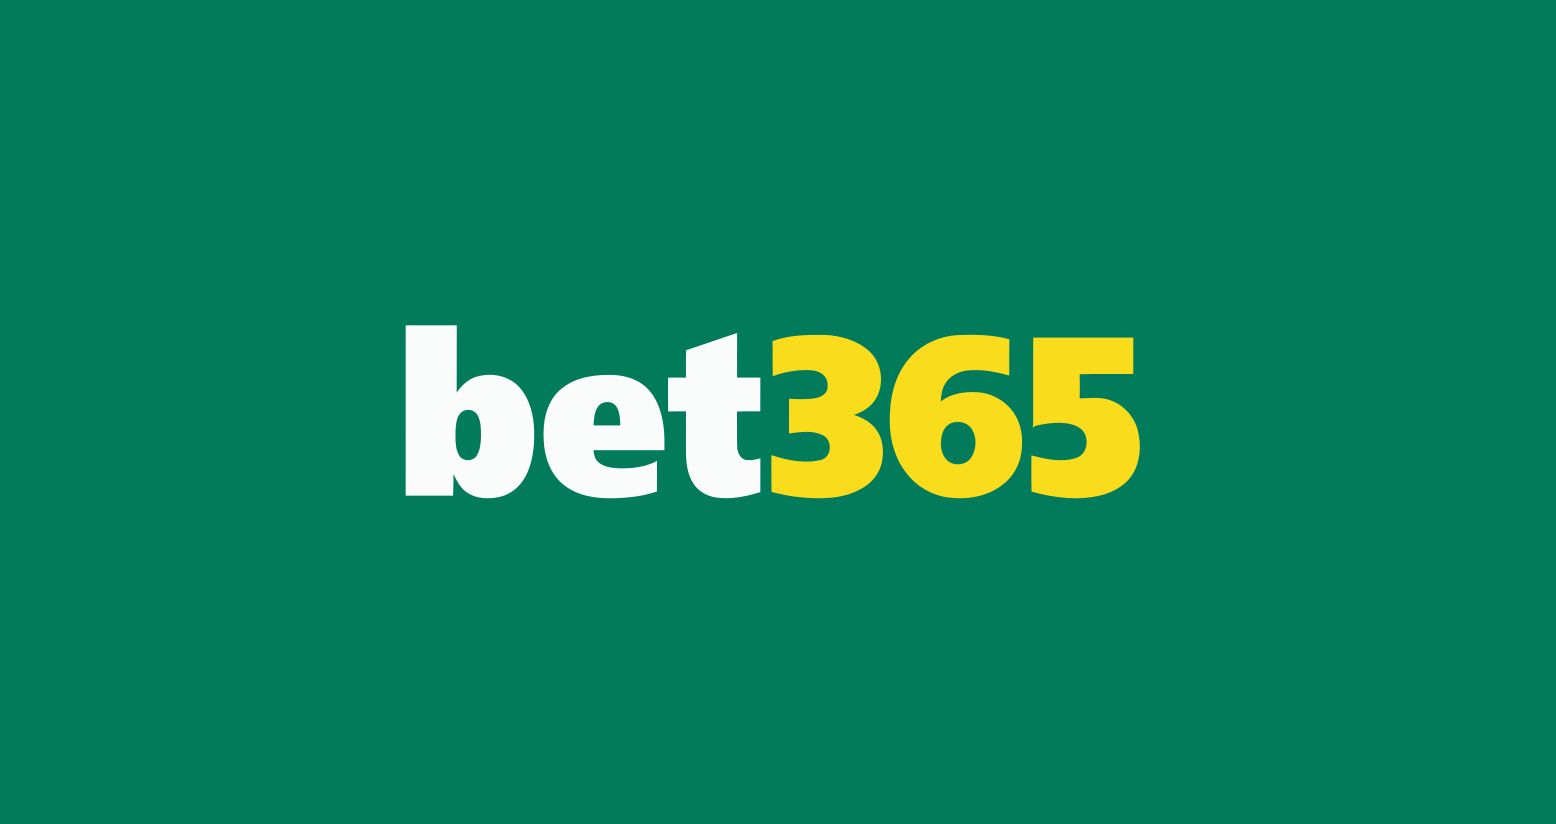 Image of Bet365 banner